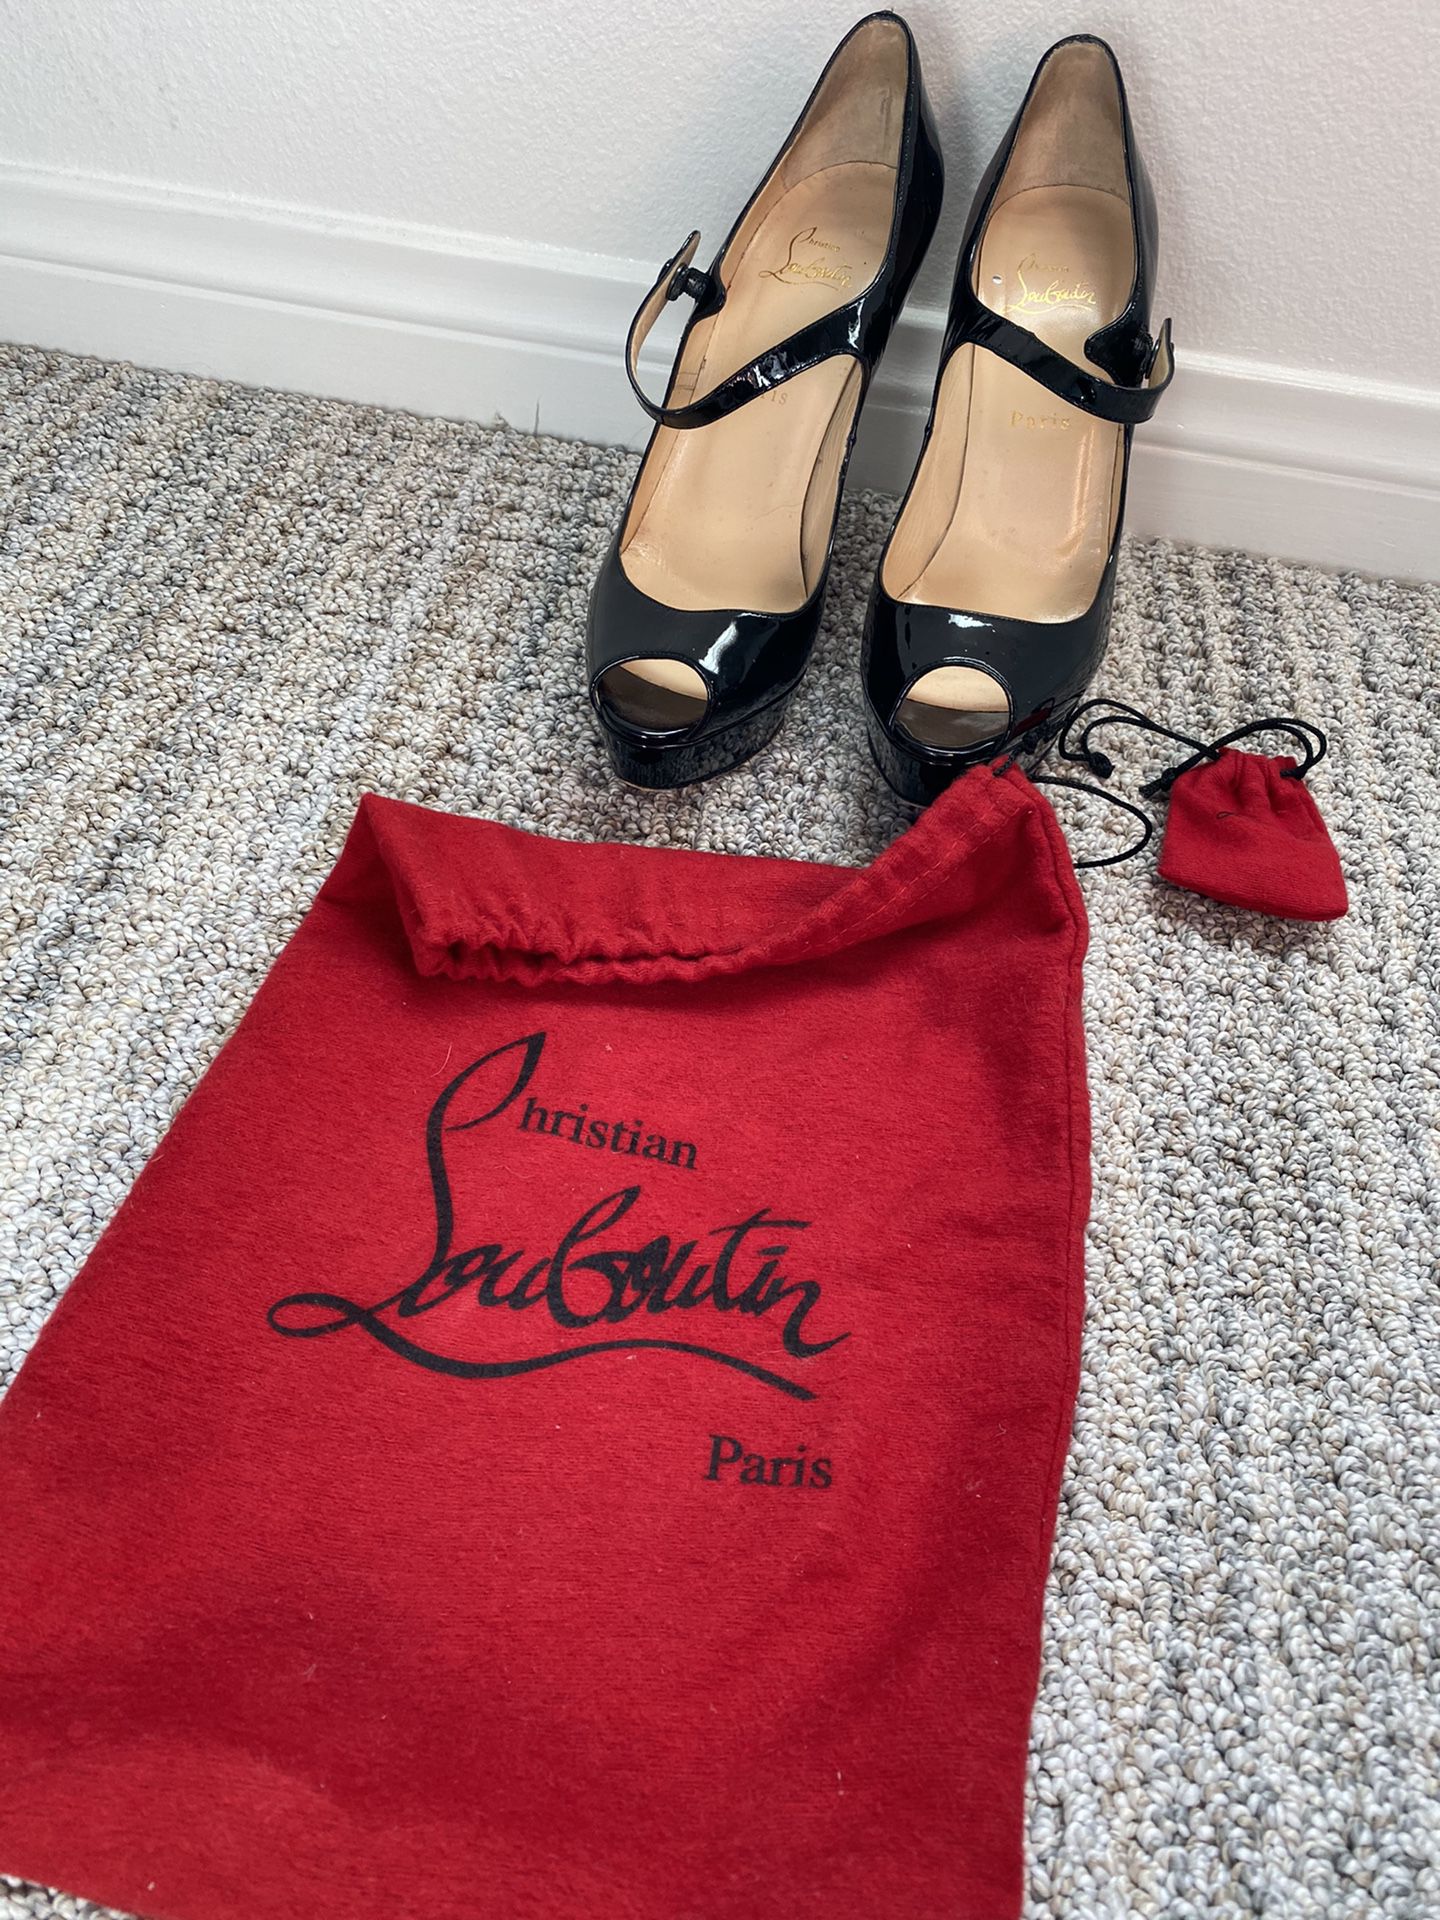 Authentic Christian louboutin shoes 39.5